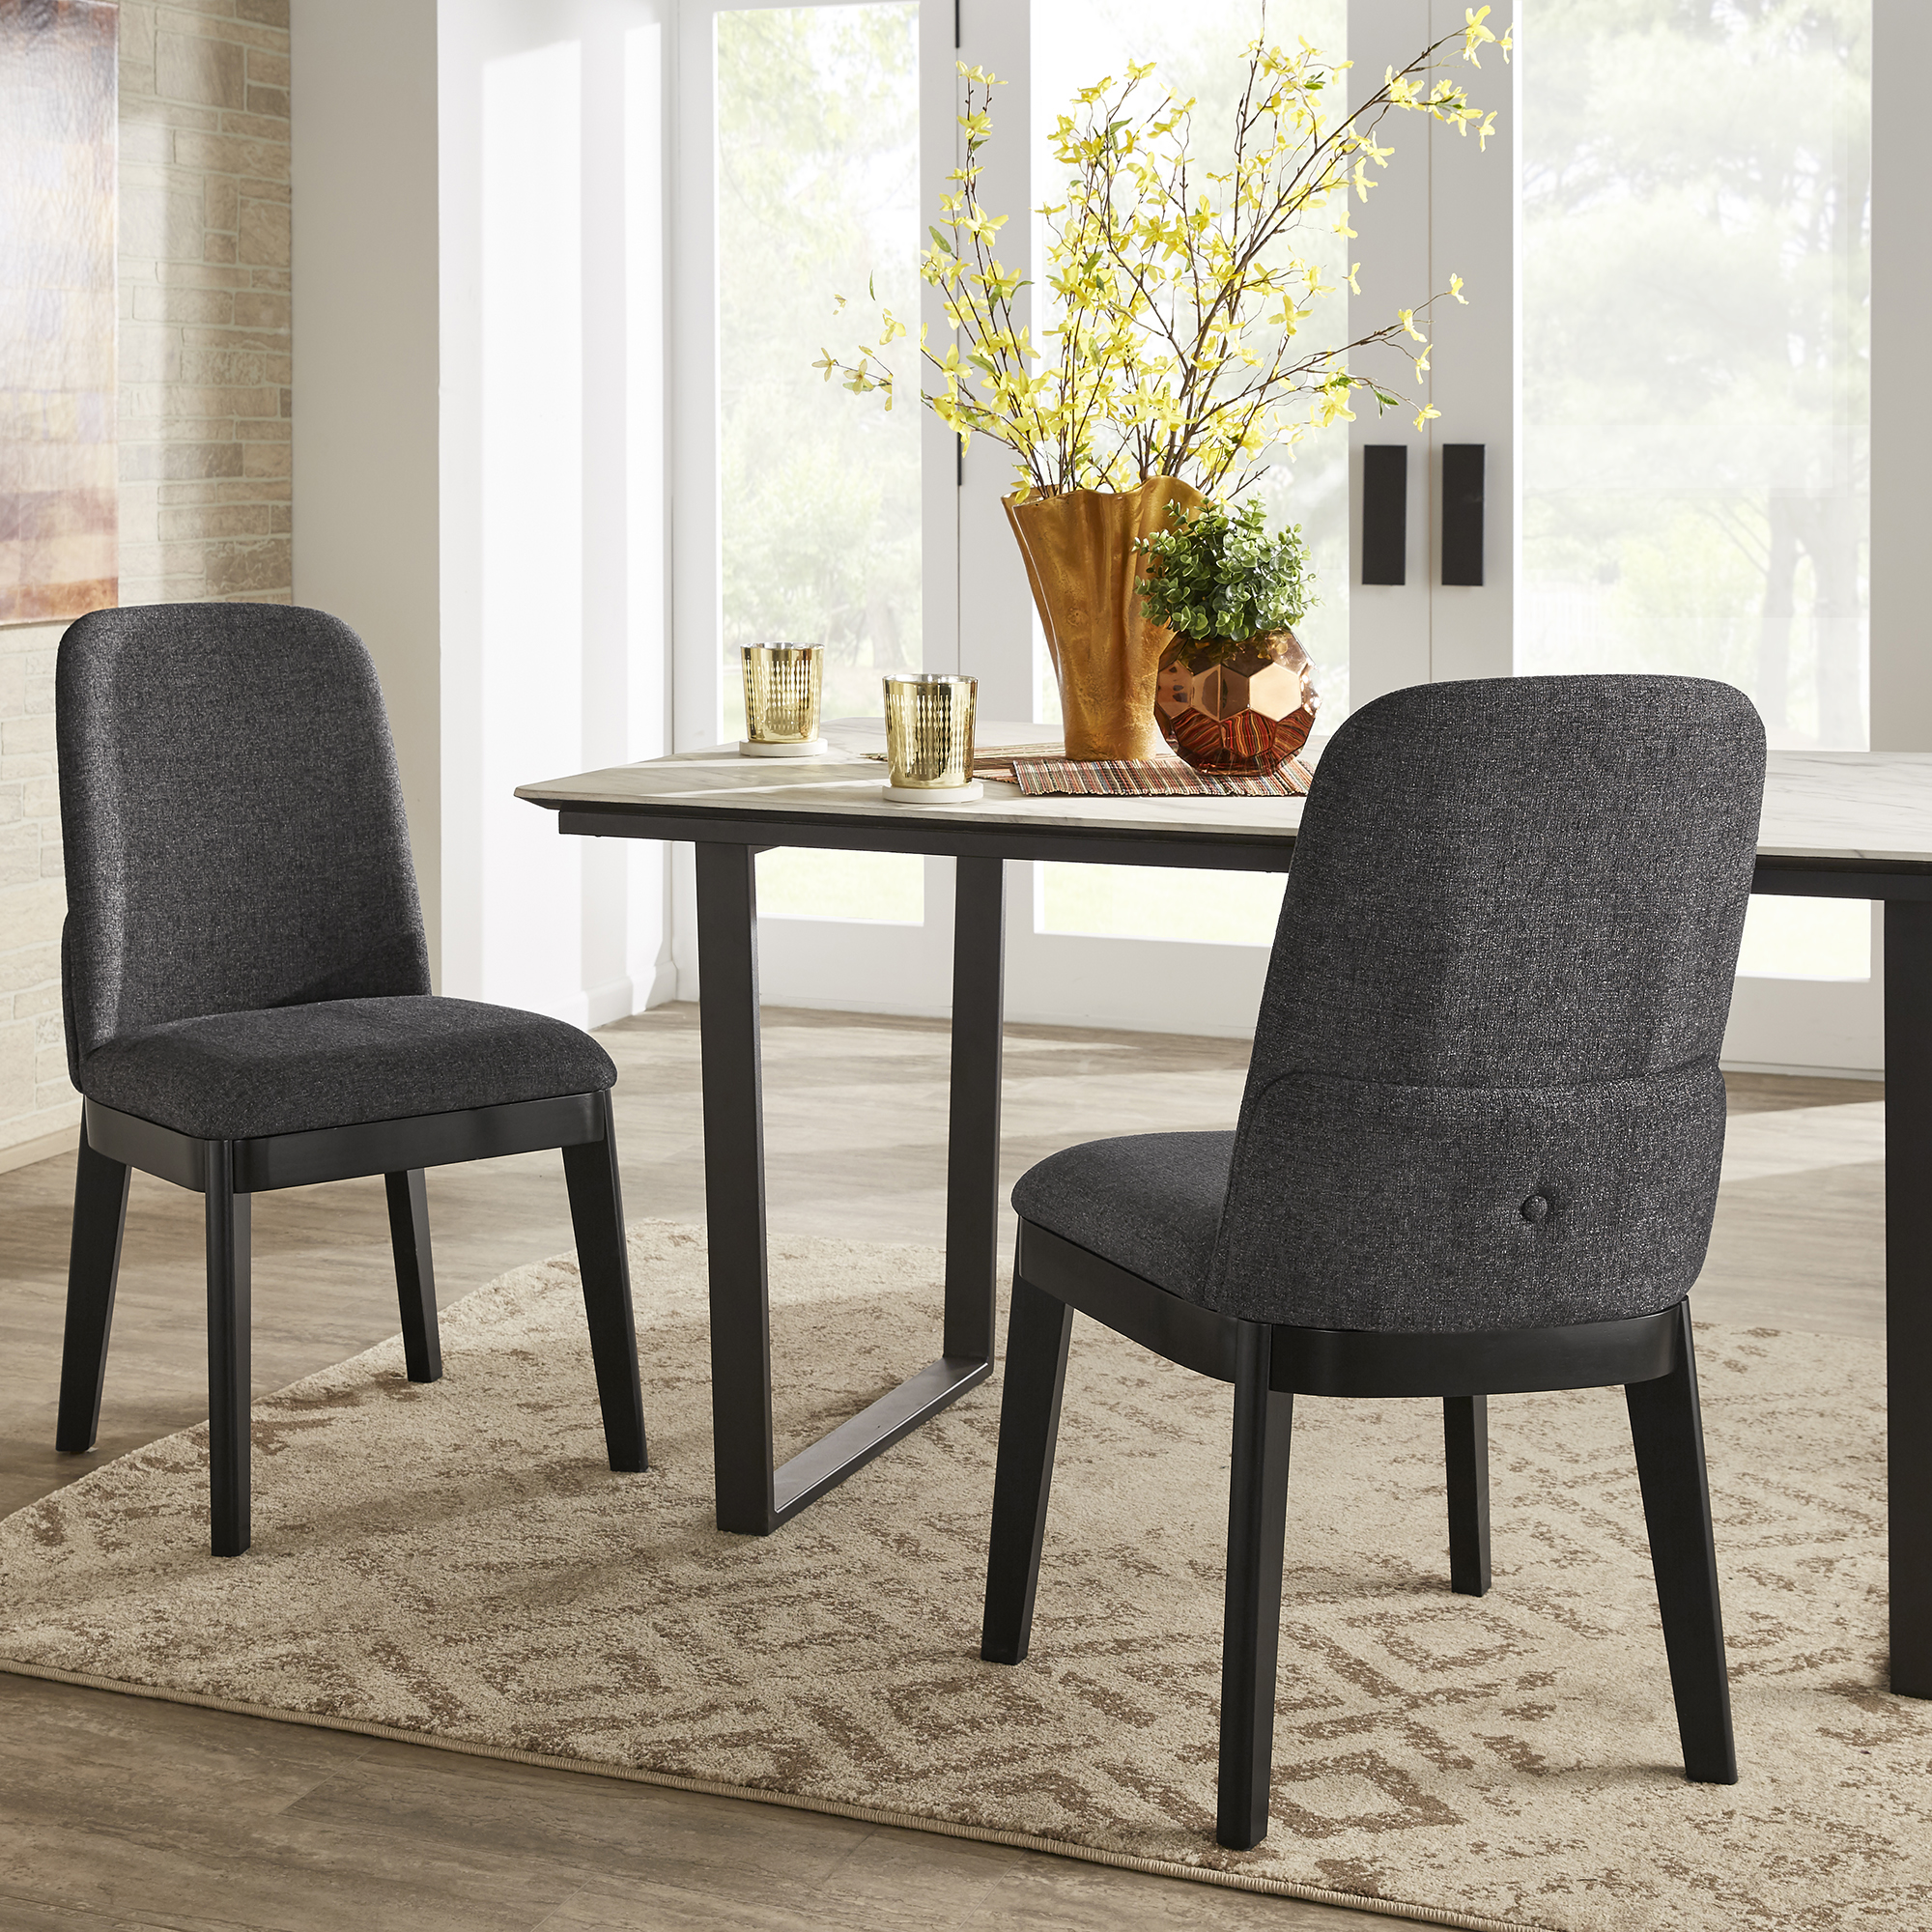 Black Heathered Dining Chair (Set of 2)